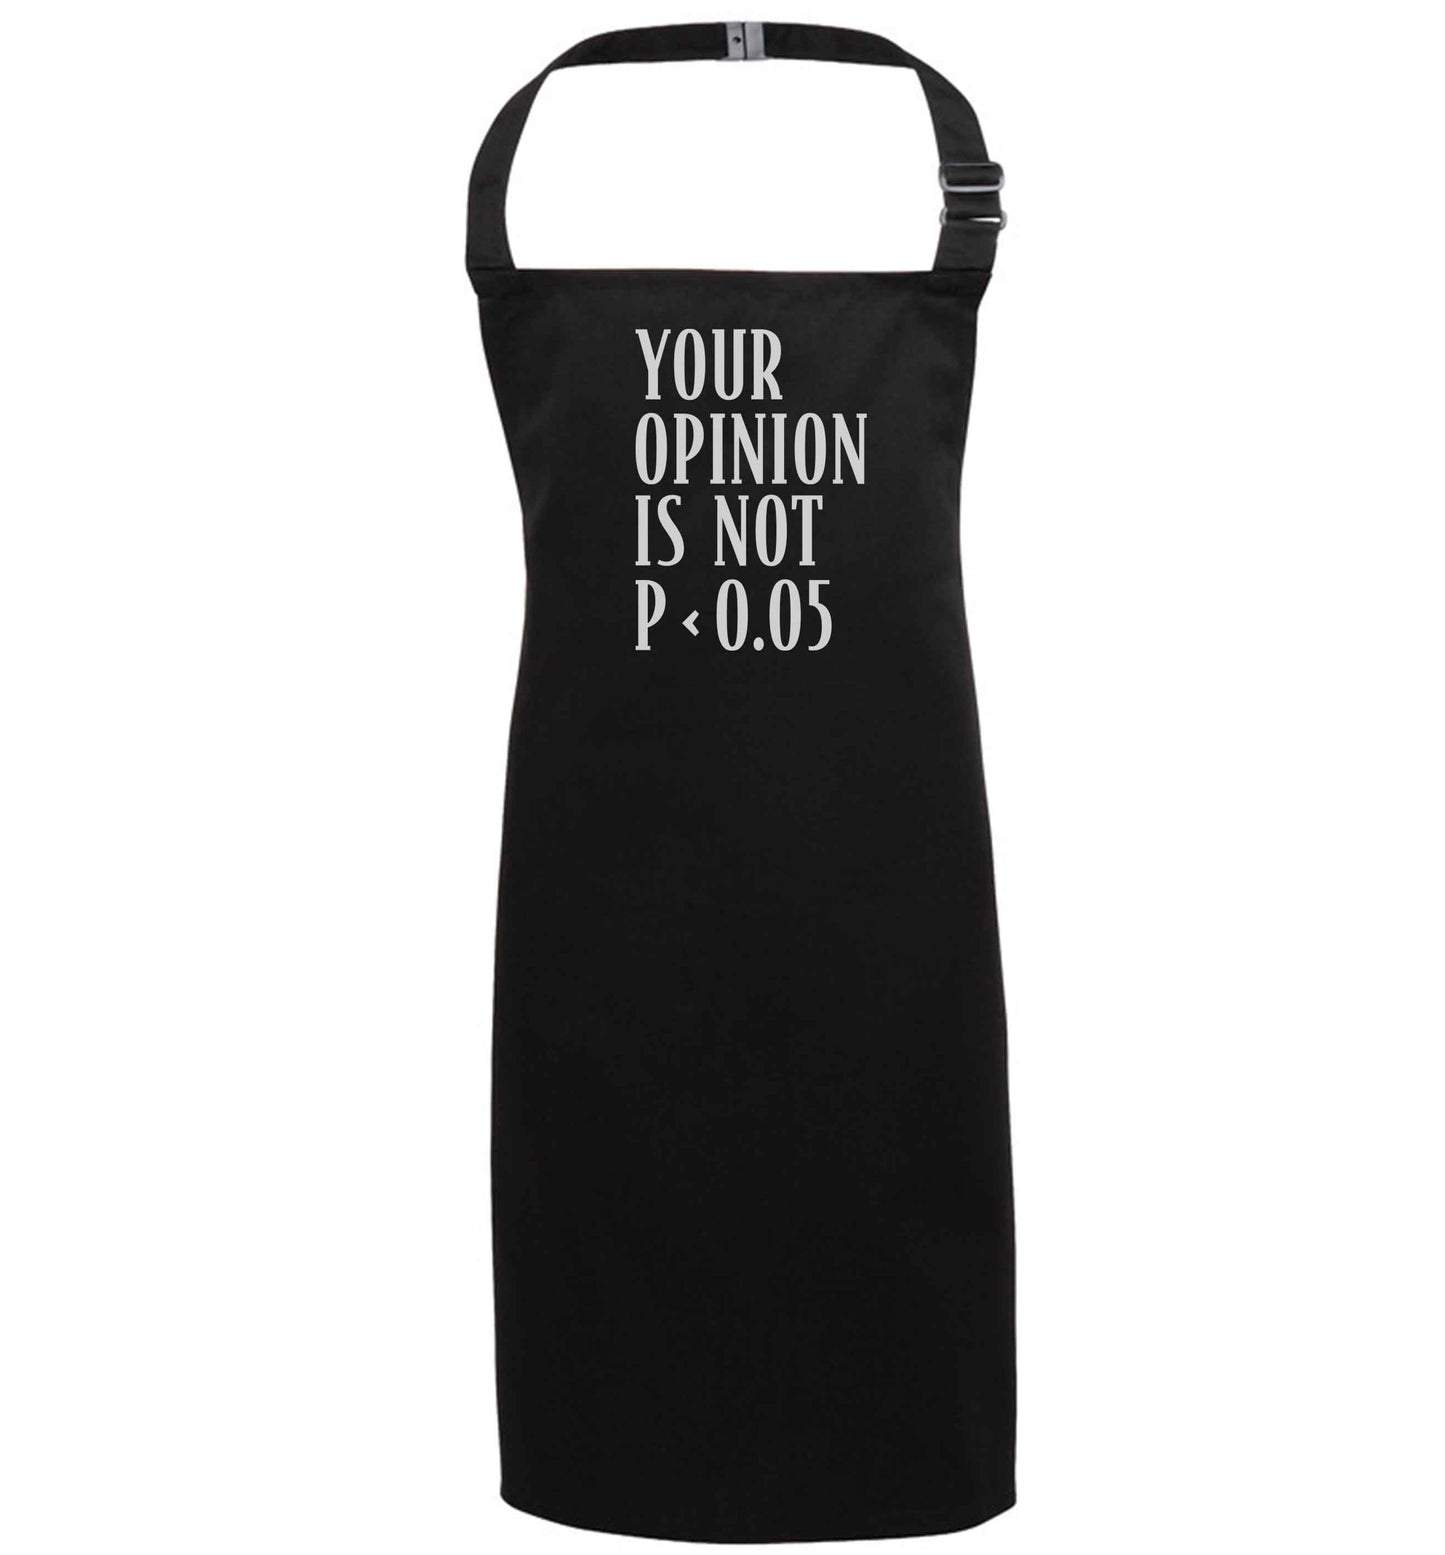 Your opinion is not P < 0.05black apron 7-10 years